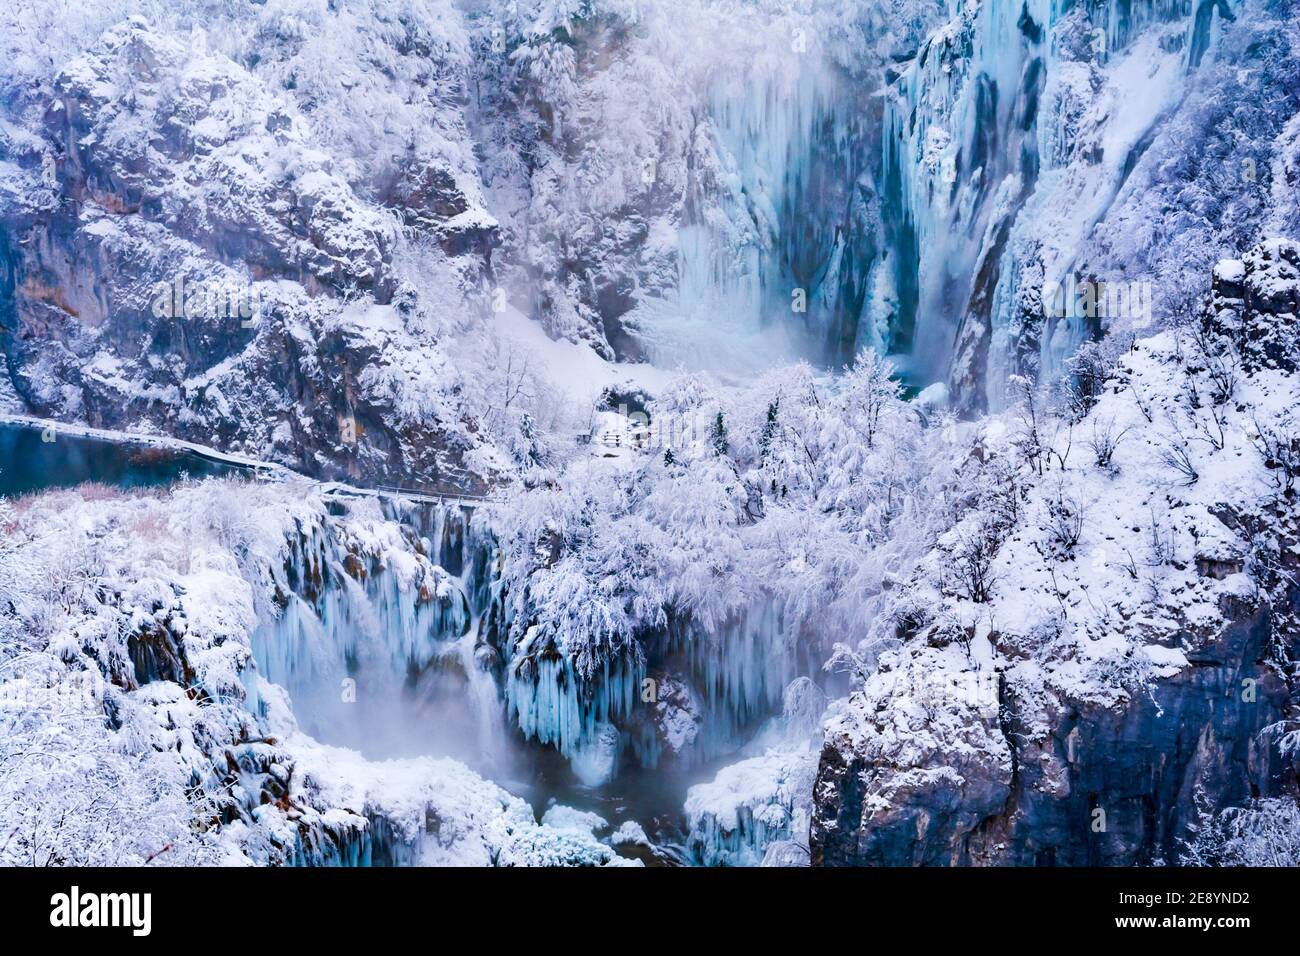 National park Plitvice lakes in Croatia Europe in Winter under covered cover snow and ice famous landmark place Veliki slap view from above Stock Photo